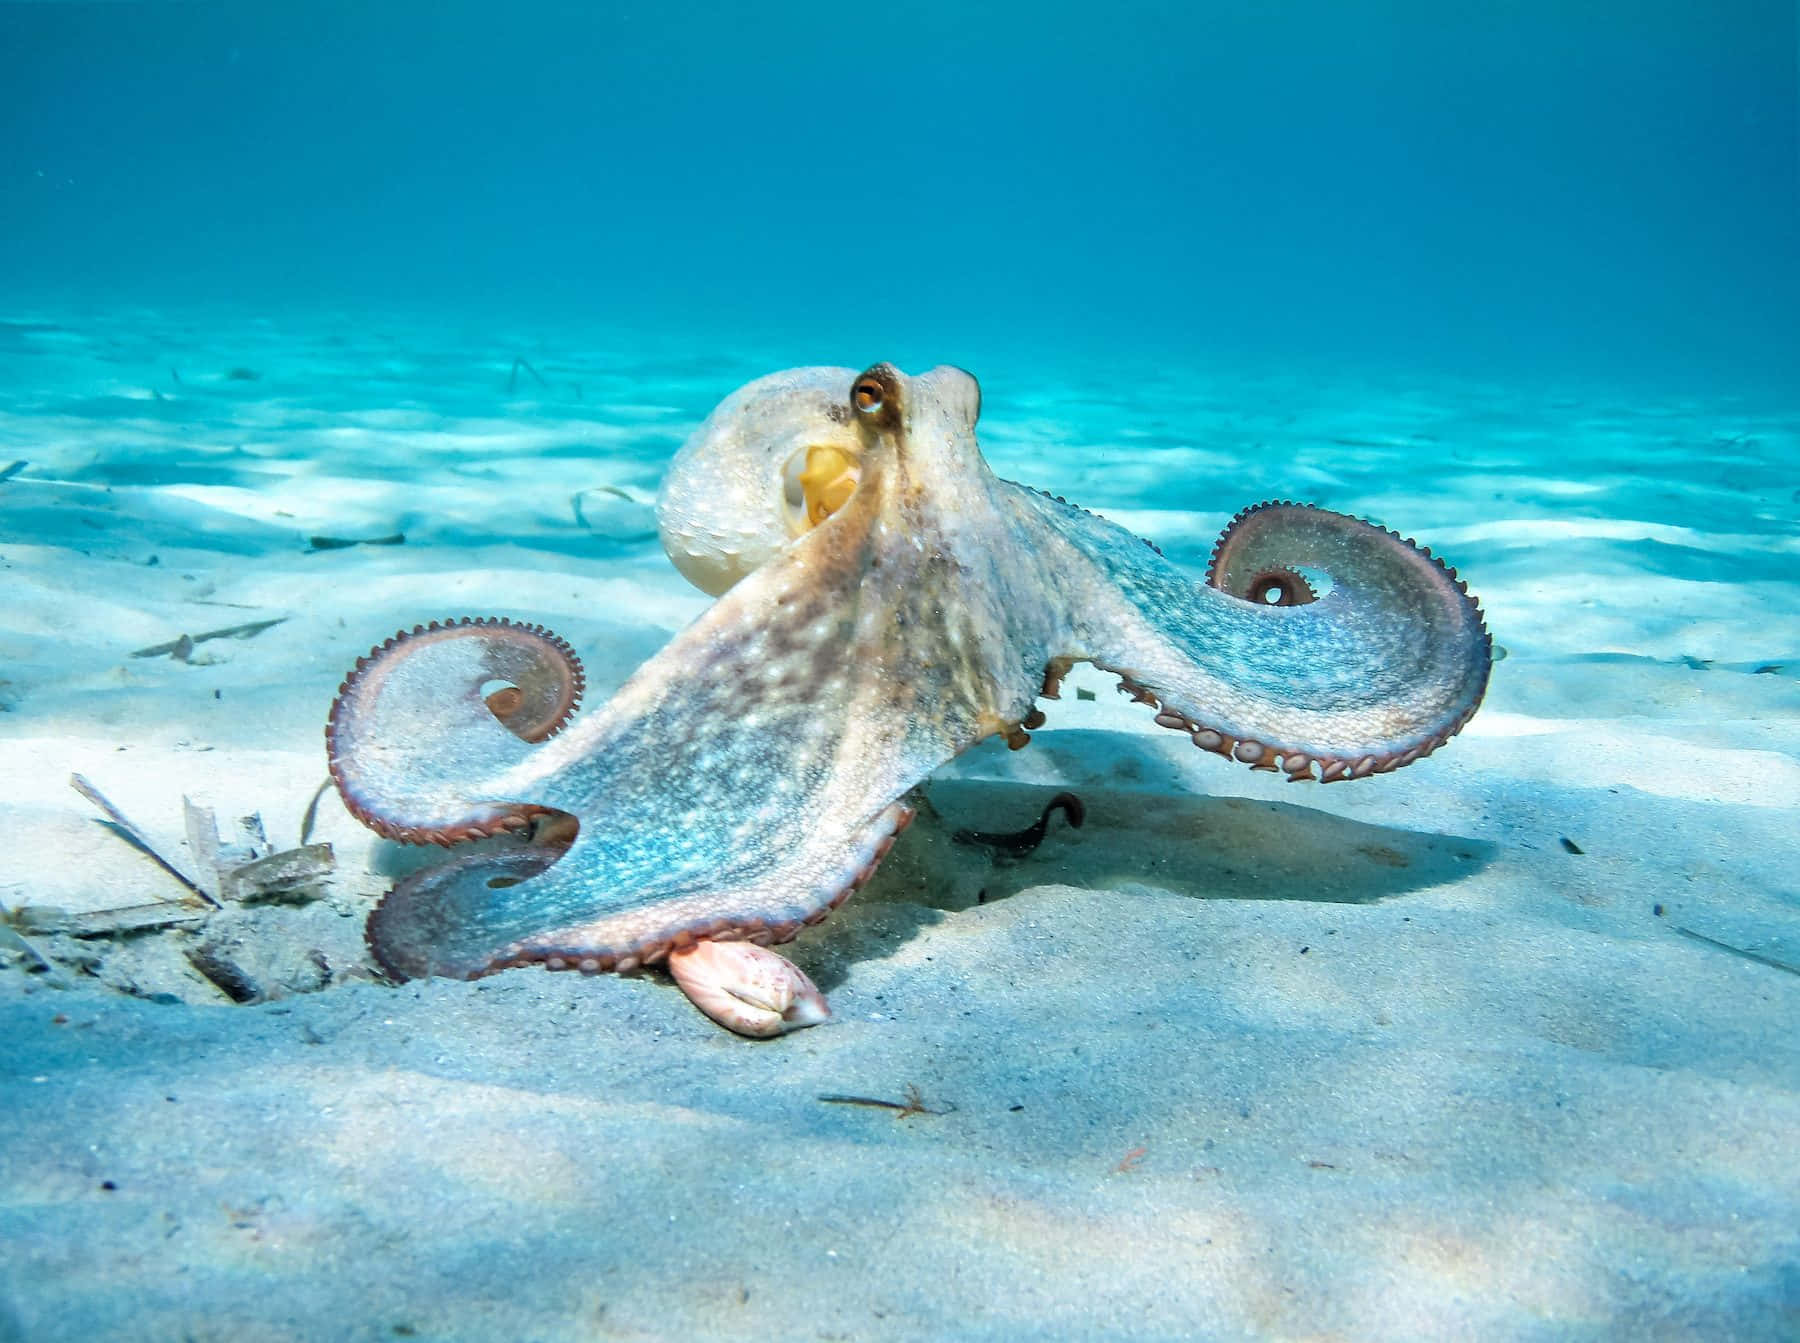 A magnificent Octopus swimming through the deep blue sea